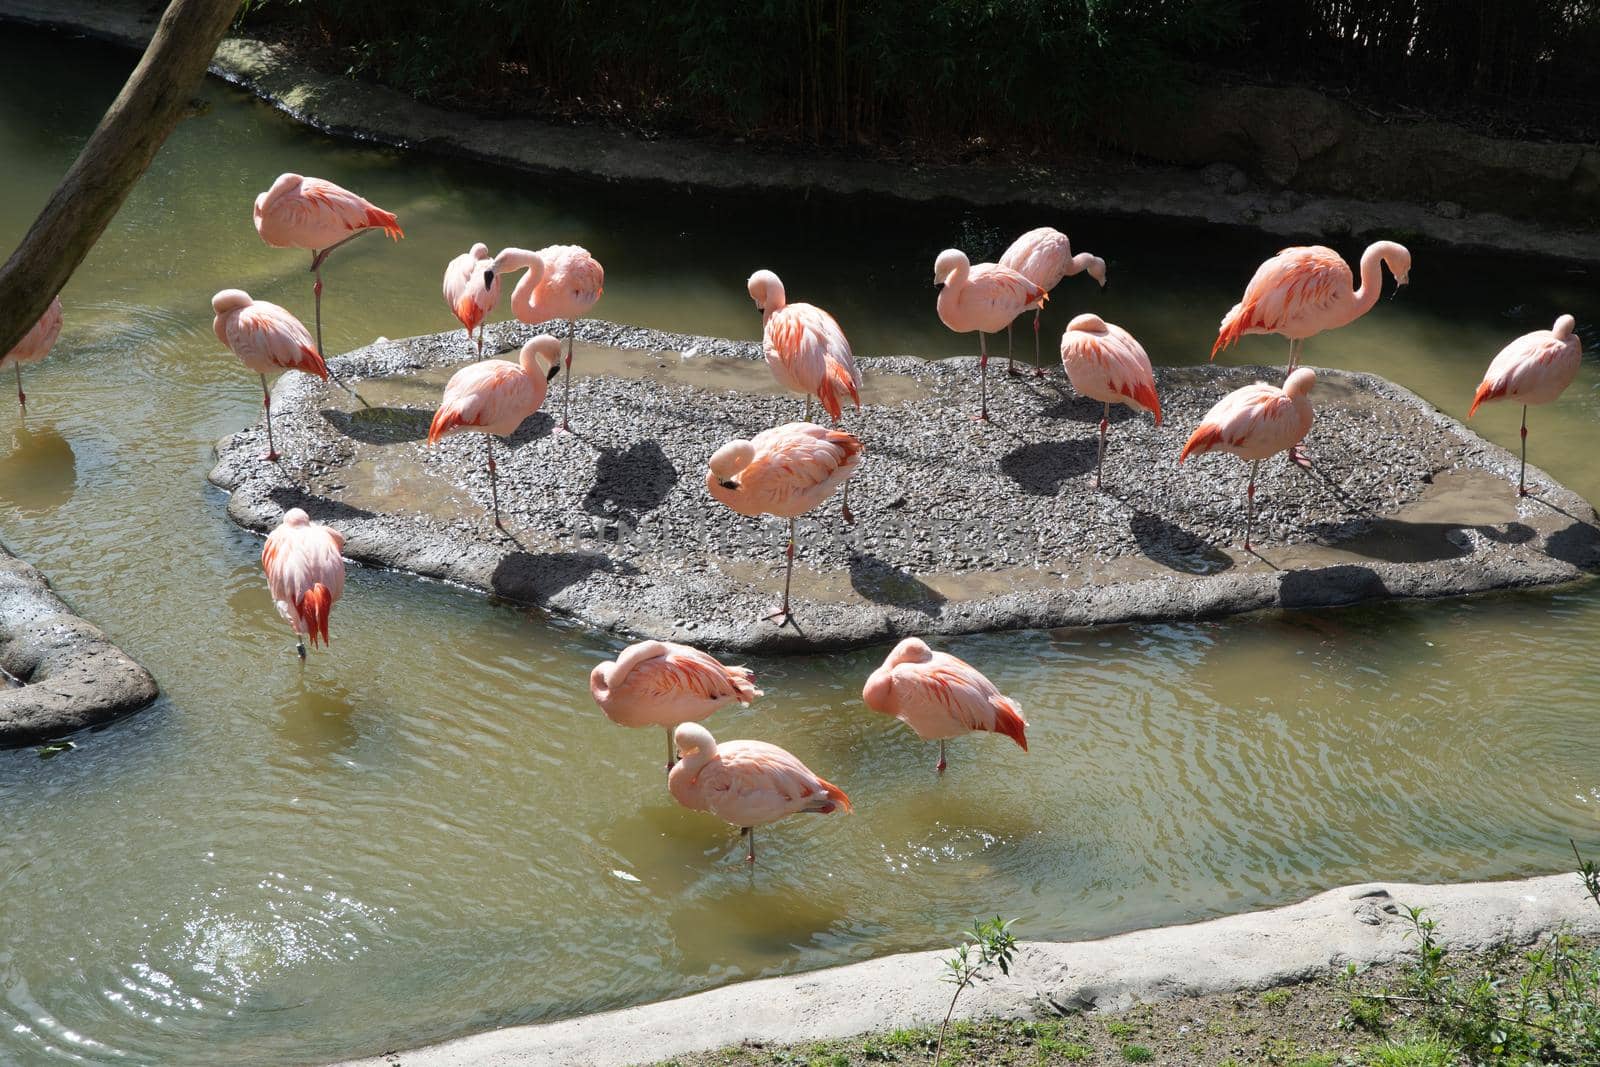 Pink flamingos stand in the water and catch food,beautiful exotic birds by KaterinaDalemans